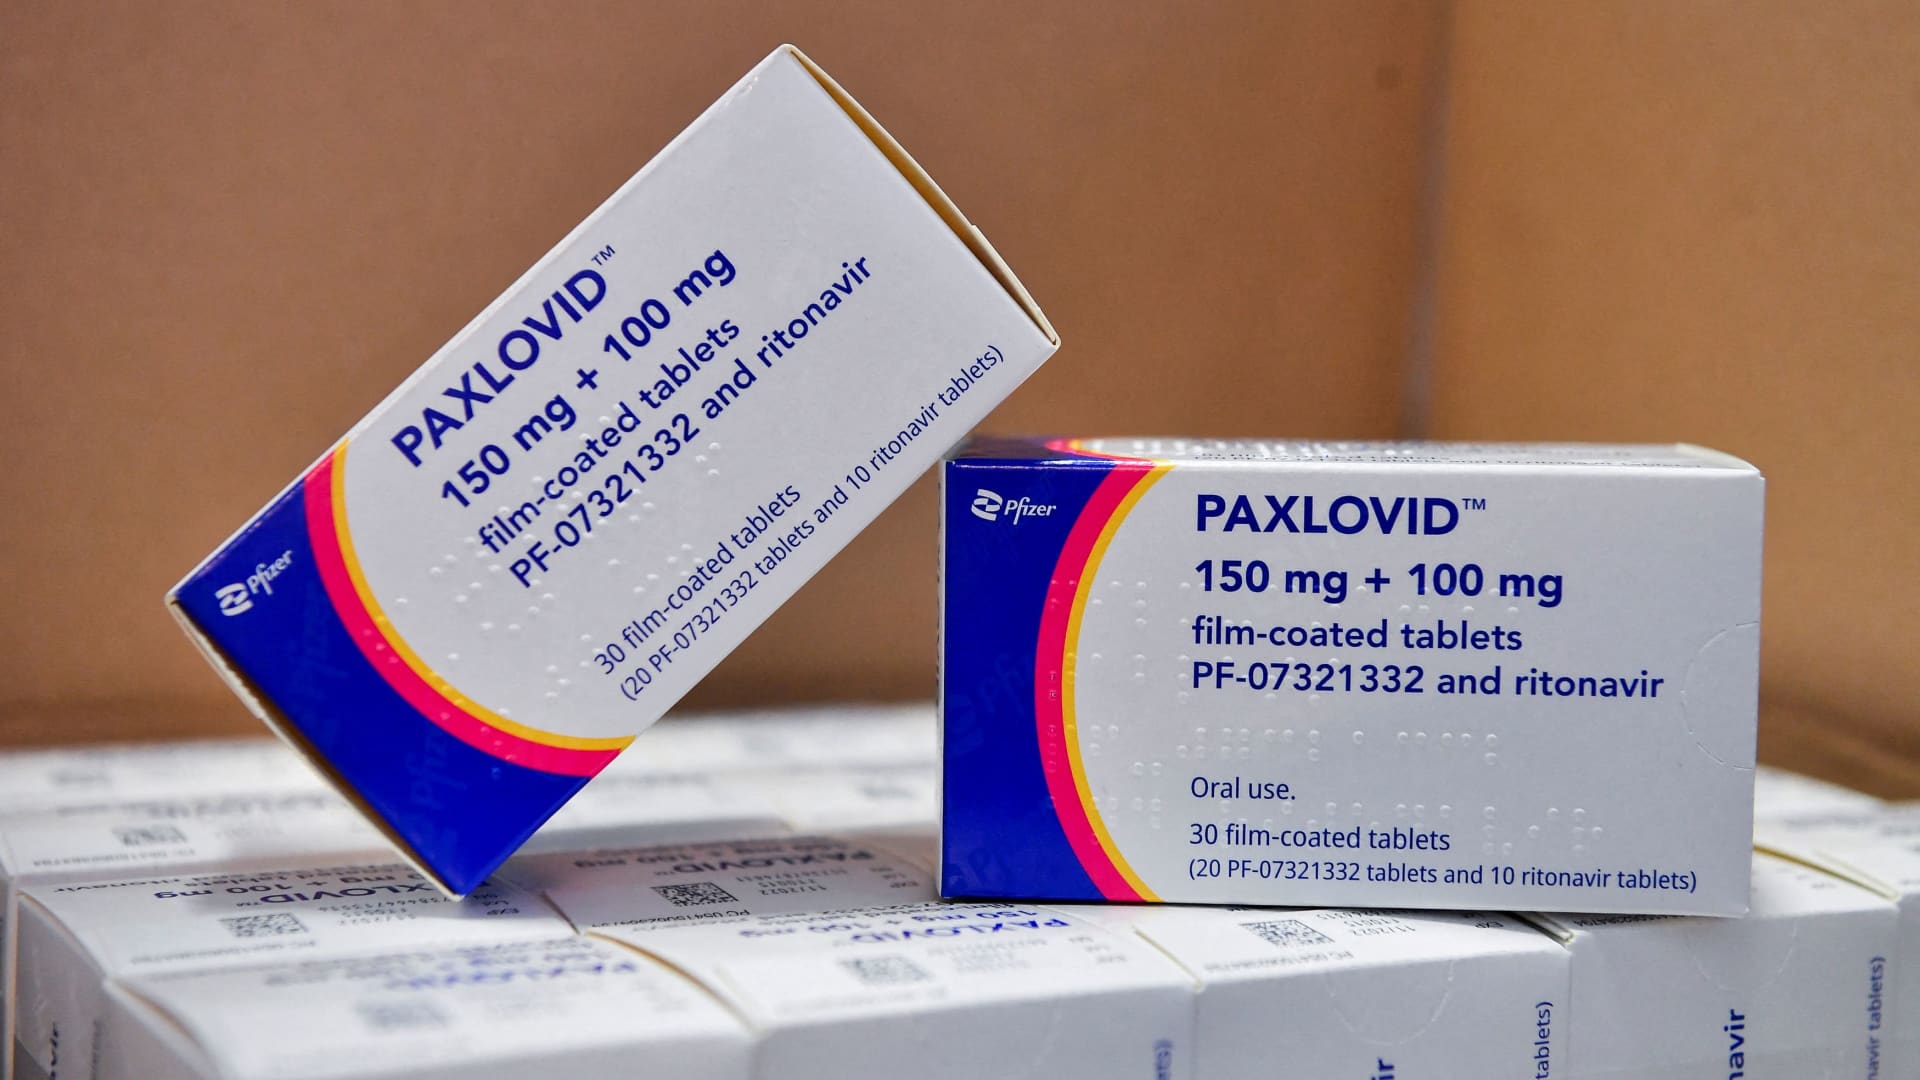 FDA grants full approval to Pfizer Covid treatment Paxlovid for high-risk adults - CNBC